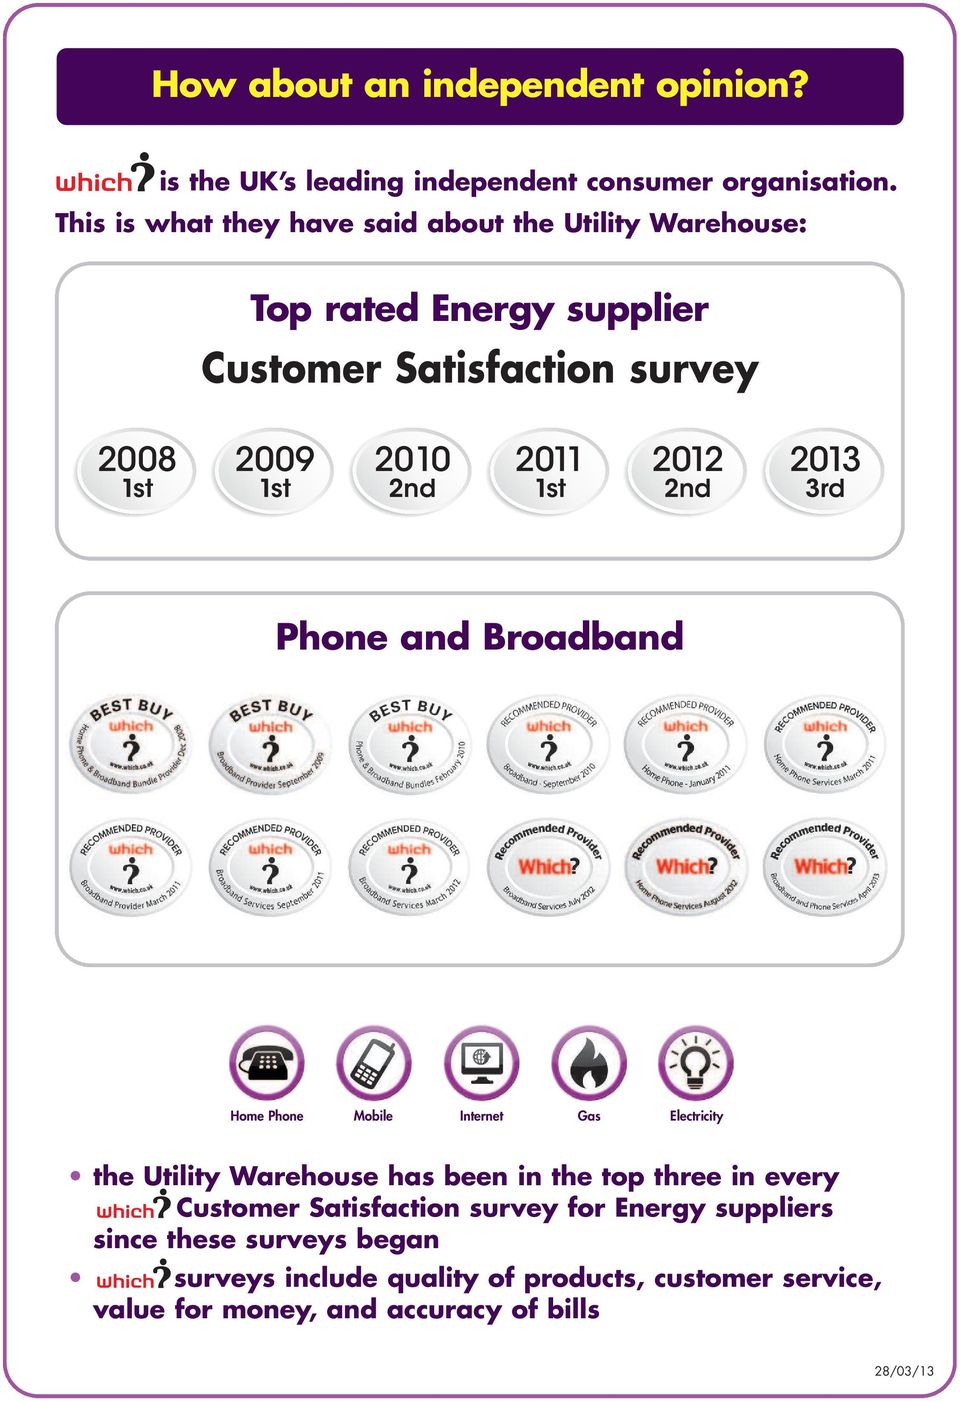 2011 1st 2012 2nd 2013 3rd Phone and Broadband Home Phone Mobile Internet Gas Electricity the Utility Warehouse has been in the top three